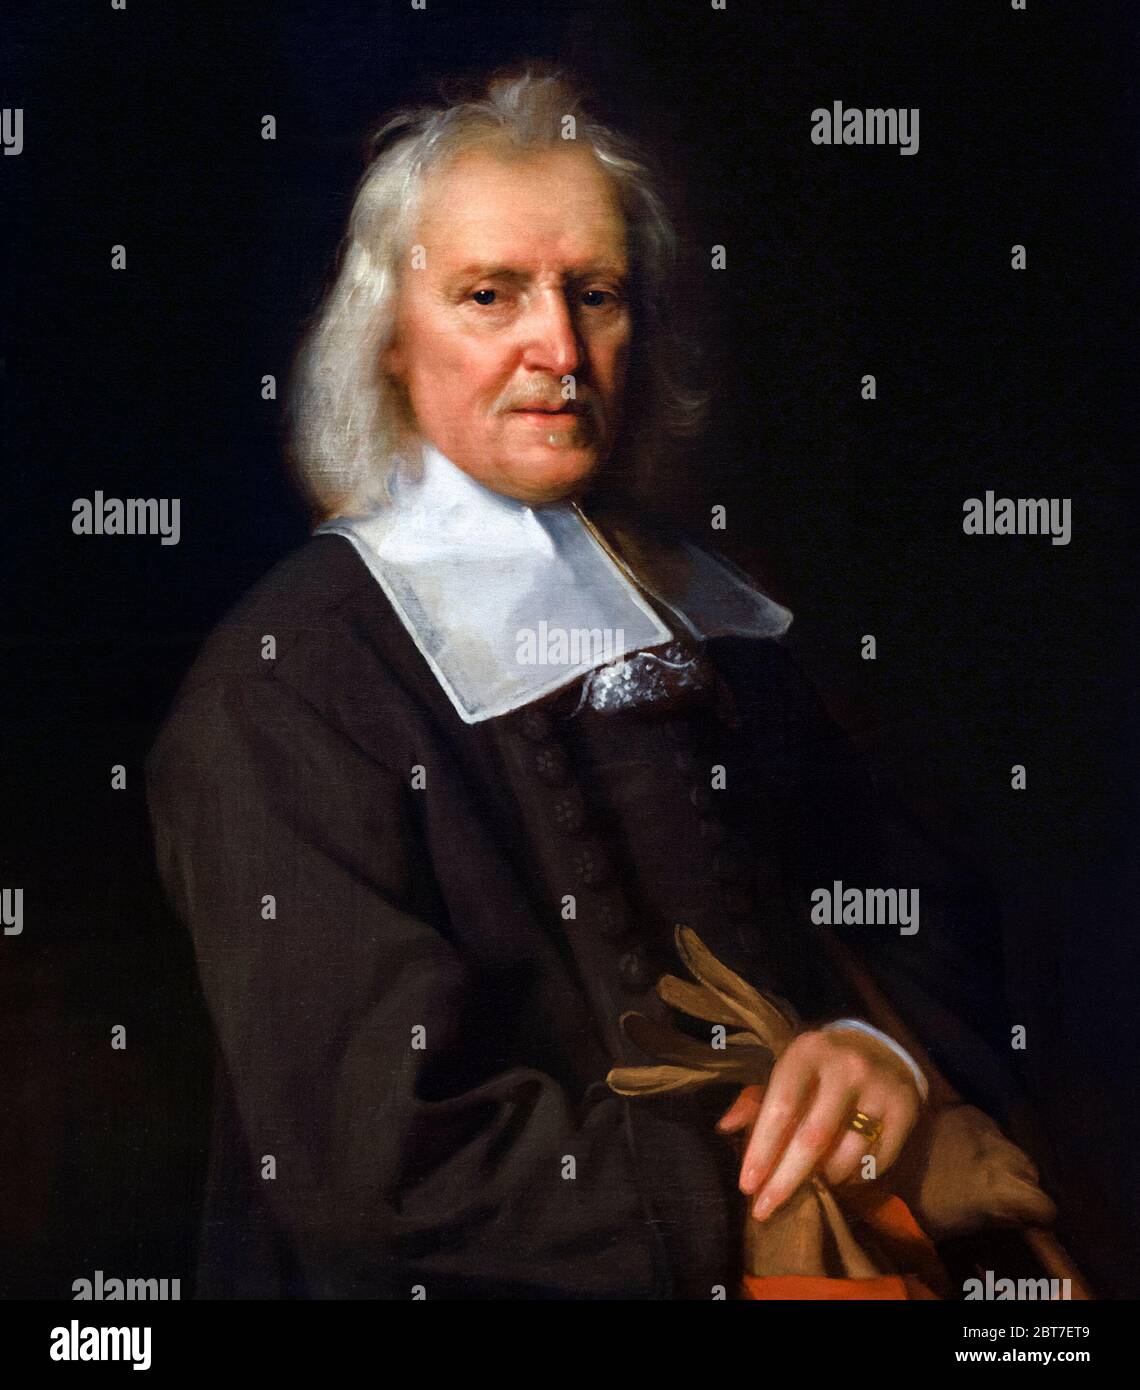 Izaak Walton (c.1594–1683), portrait by Jacob Huysmans, oil on canvas, c.1672. Walton was an English writer best remembered as the author of the 'The Compleat Angler'. Stock Photo